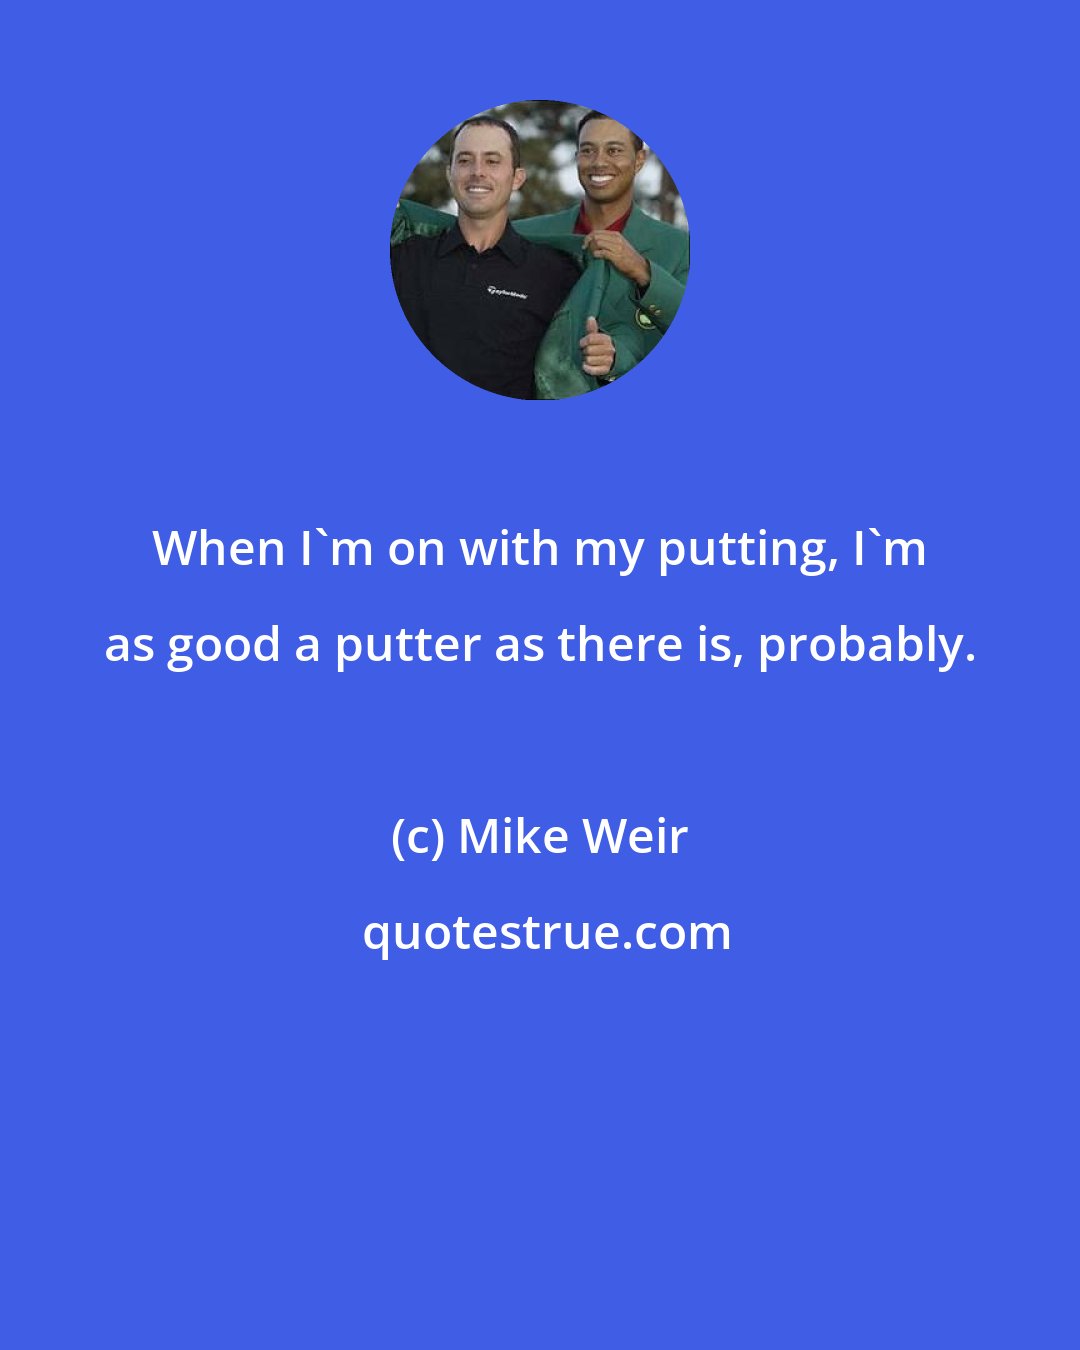 Mike Weir: When I'm on with my putting, I'm as good a putter as there is, probably.